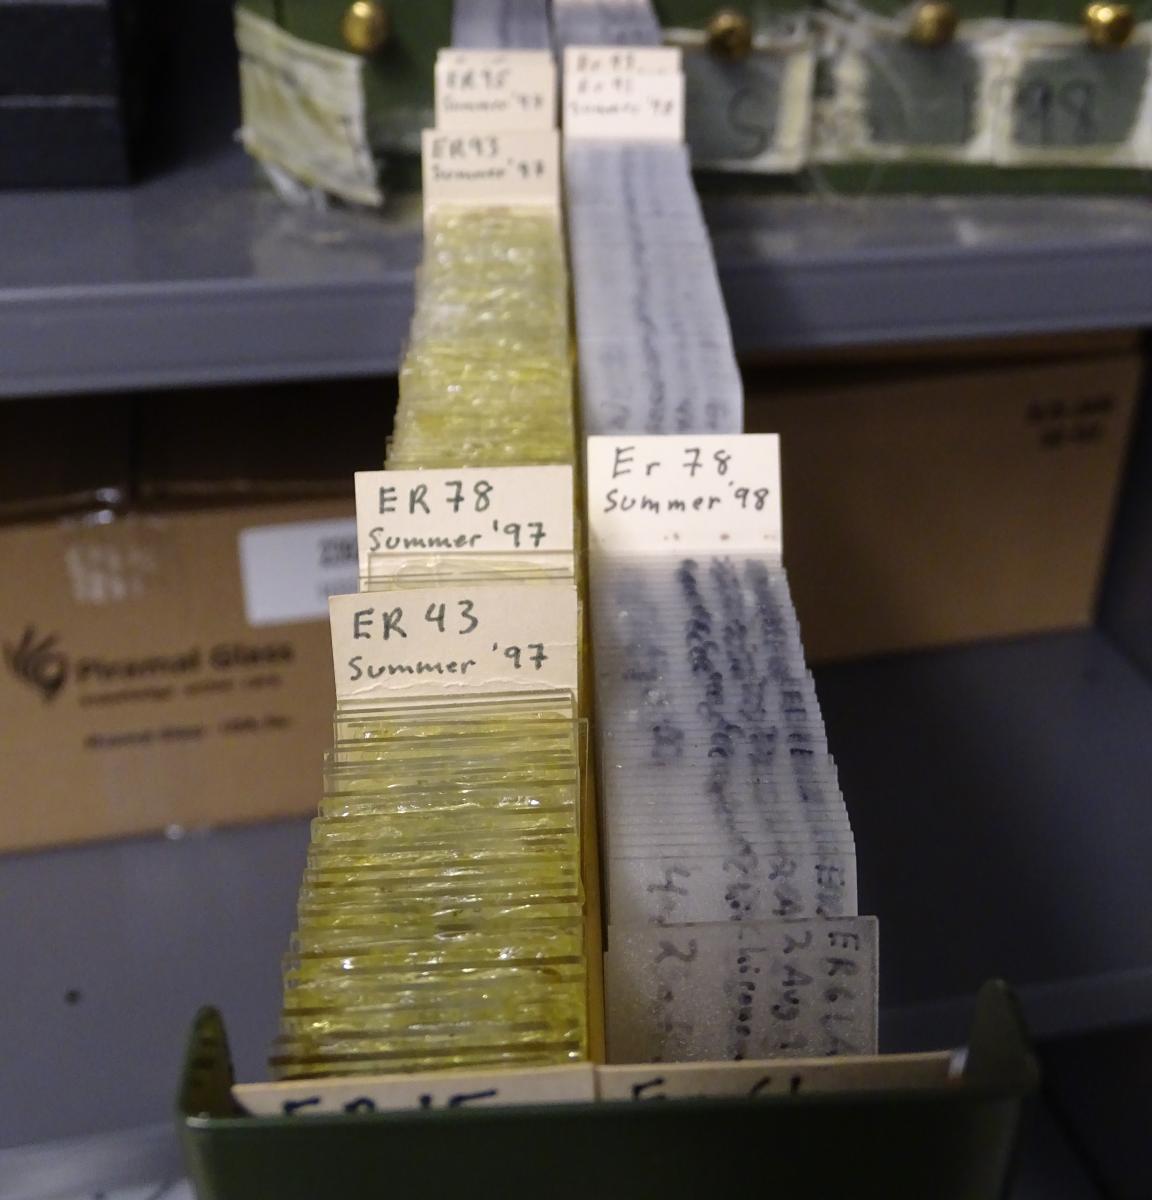 A long narrow drawer pulled out from a cabinet. The drawer contains two rows of microscope slides filed with index cards labeling the sample site and year, such as 